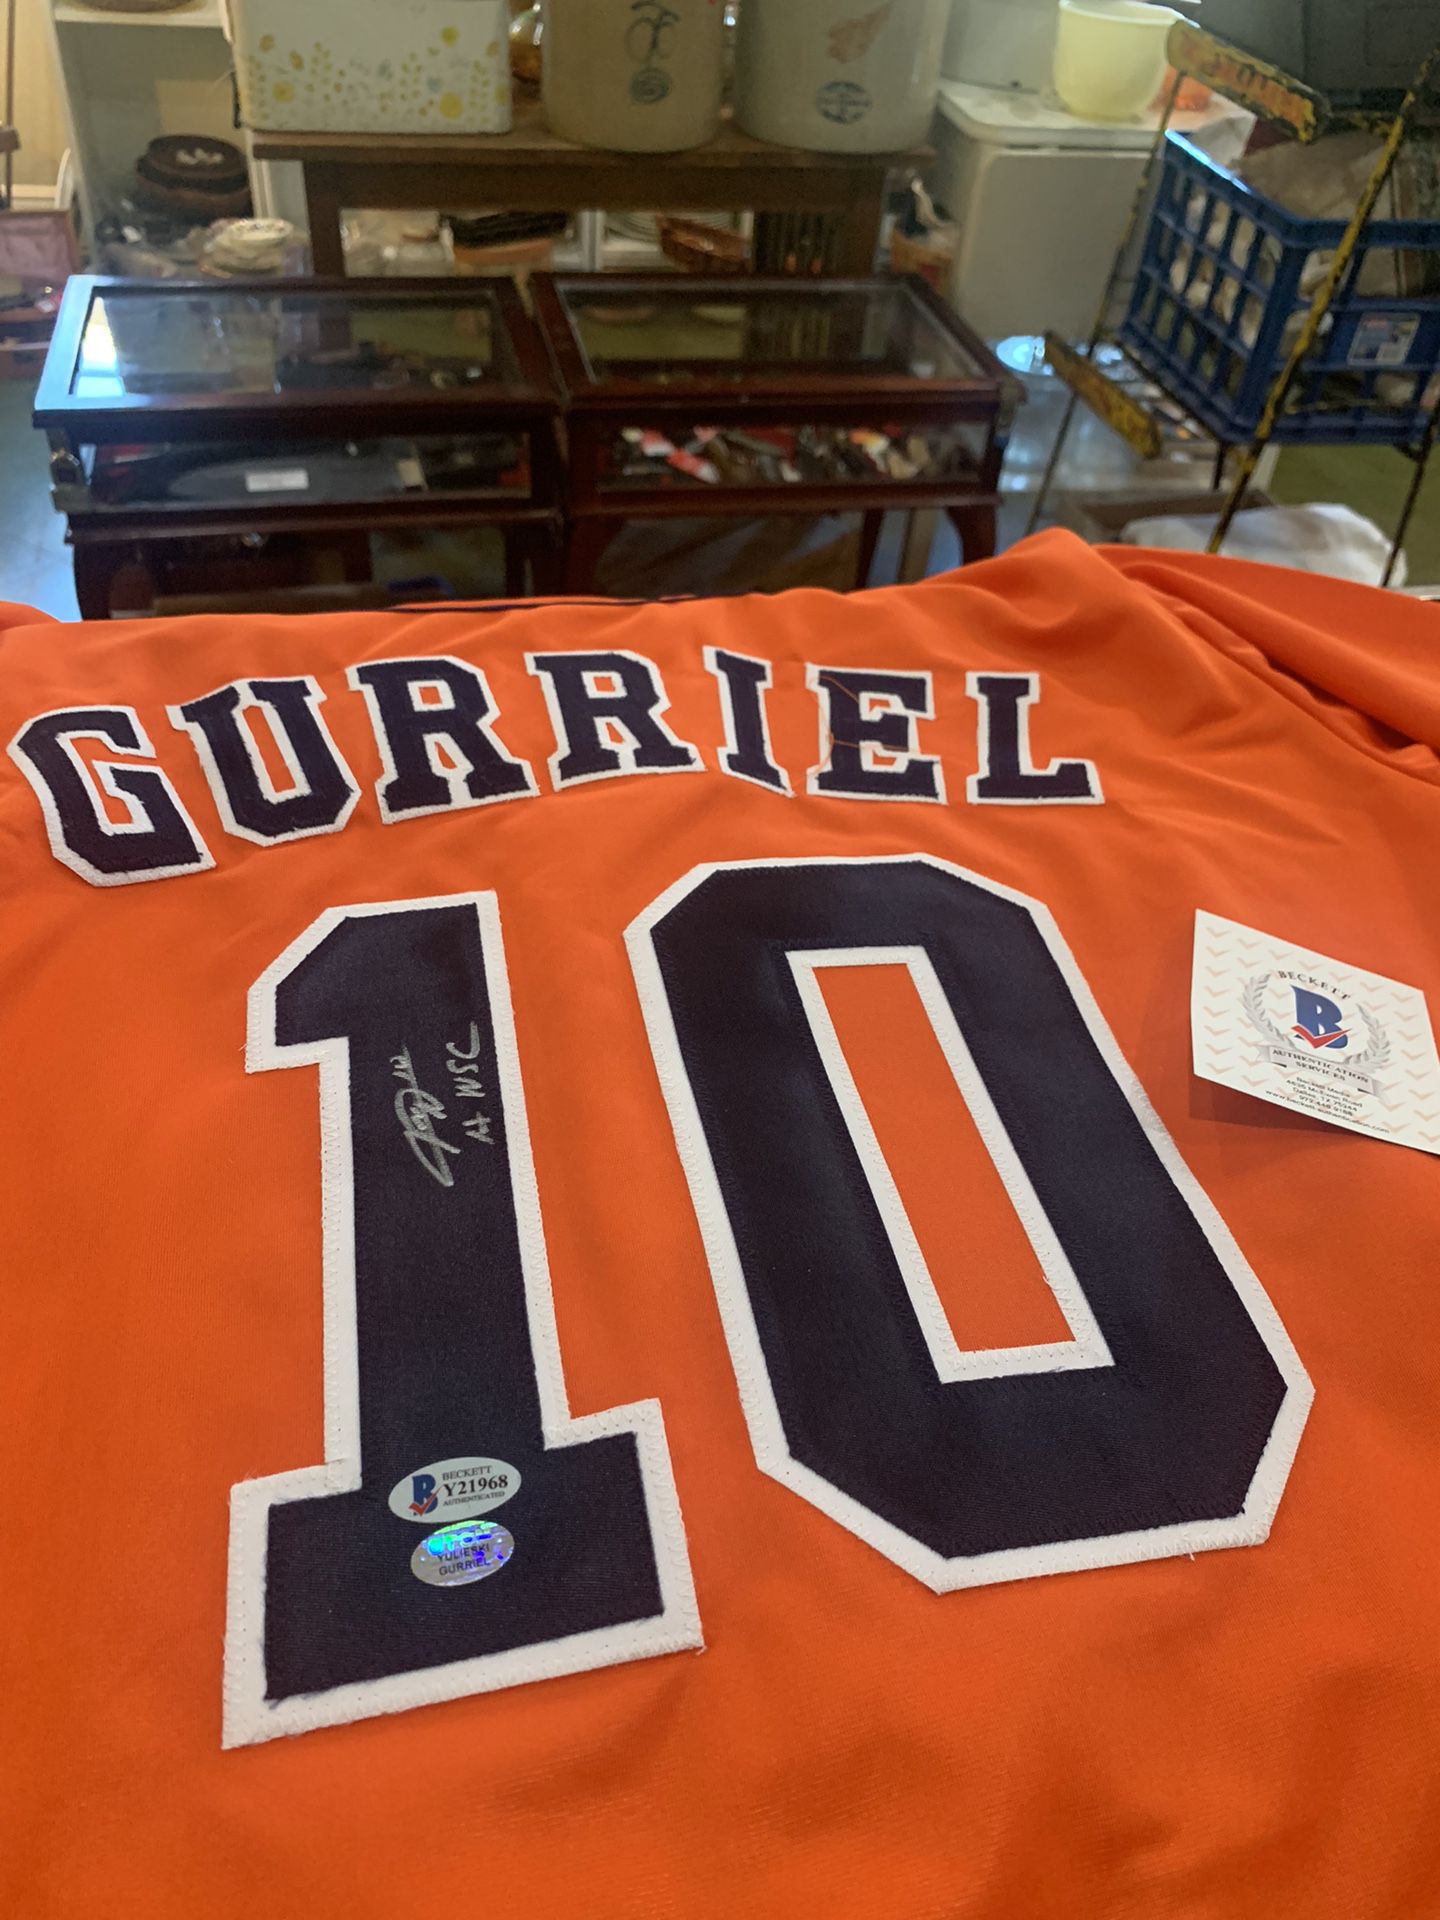 GURRIEL Signed Astros jersey C.O.A. Great Christmas gift!  225.00.  Johanna at Antiques and More. Located at 316b Main Street Buda. Antiques vintage r